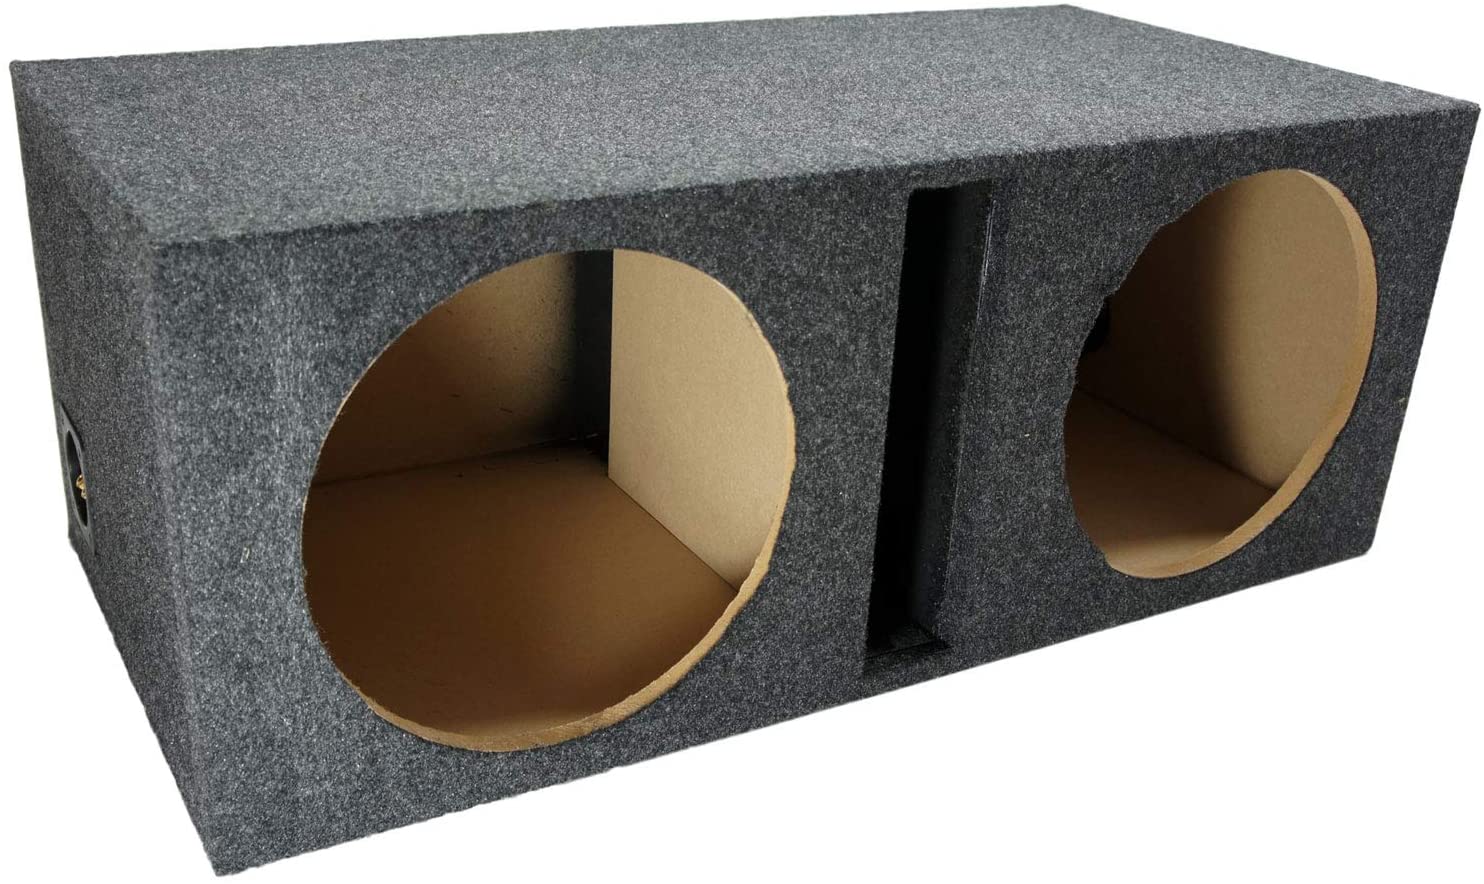 Best Box for 2 12 inch Subs